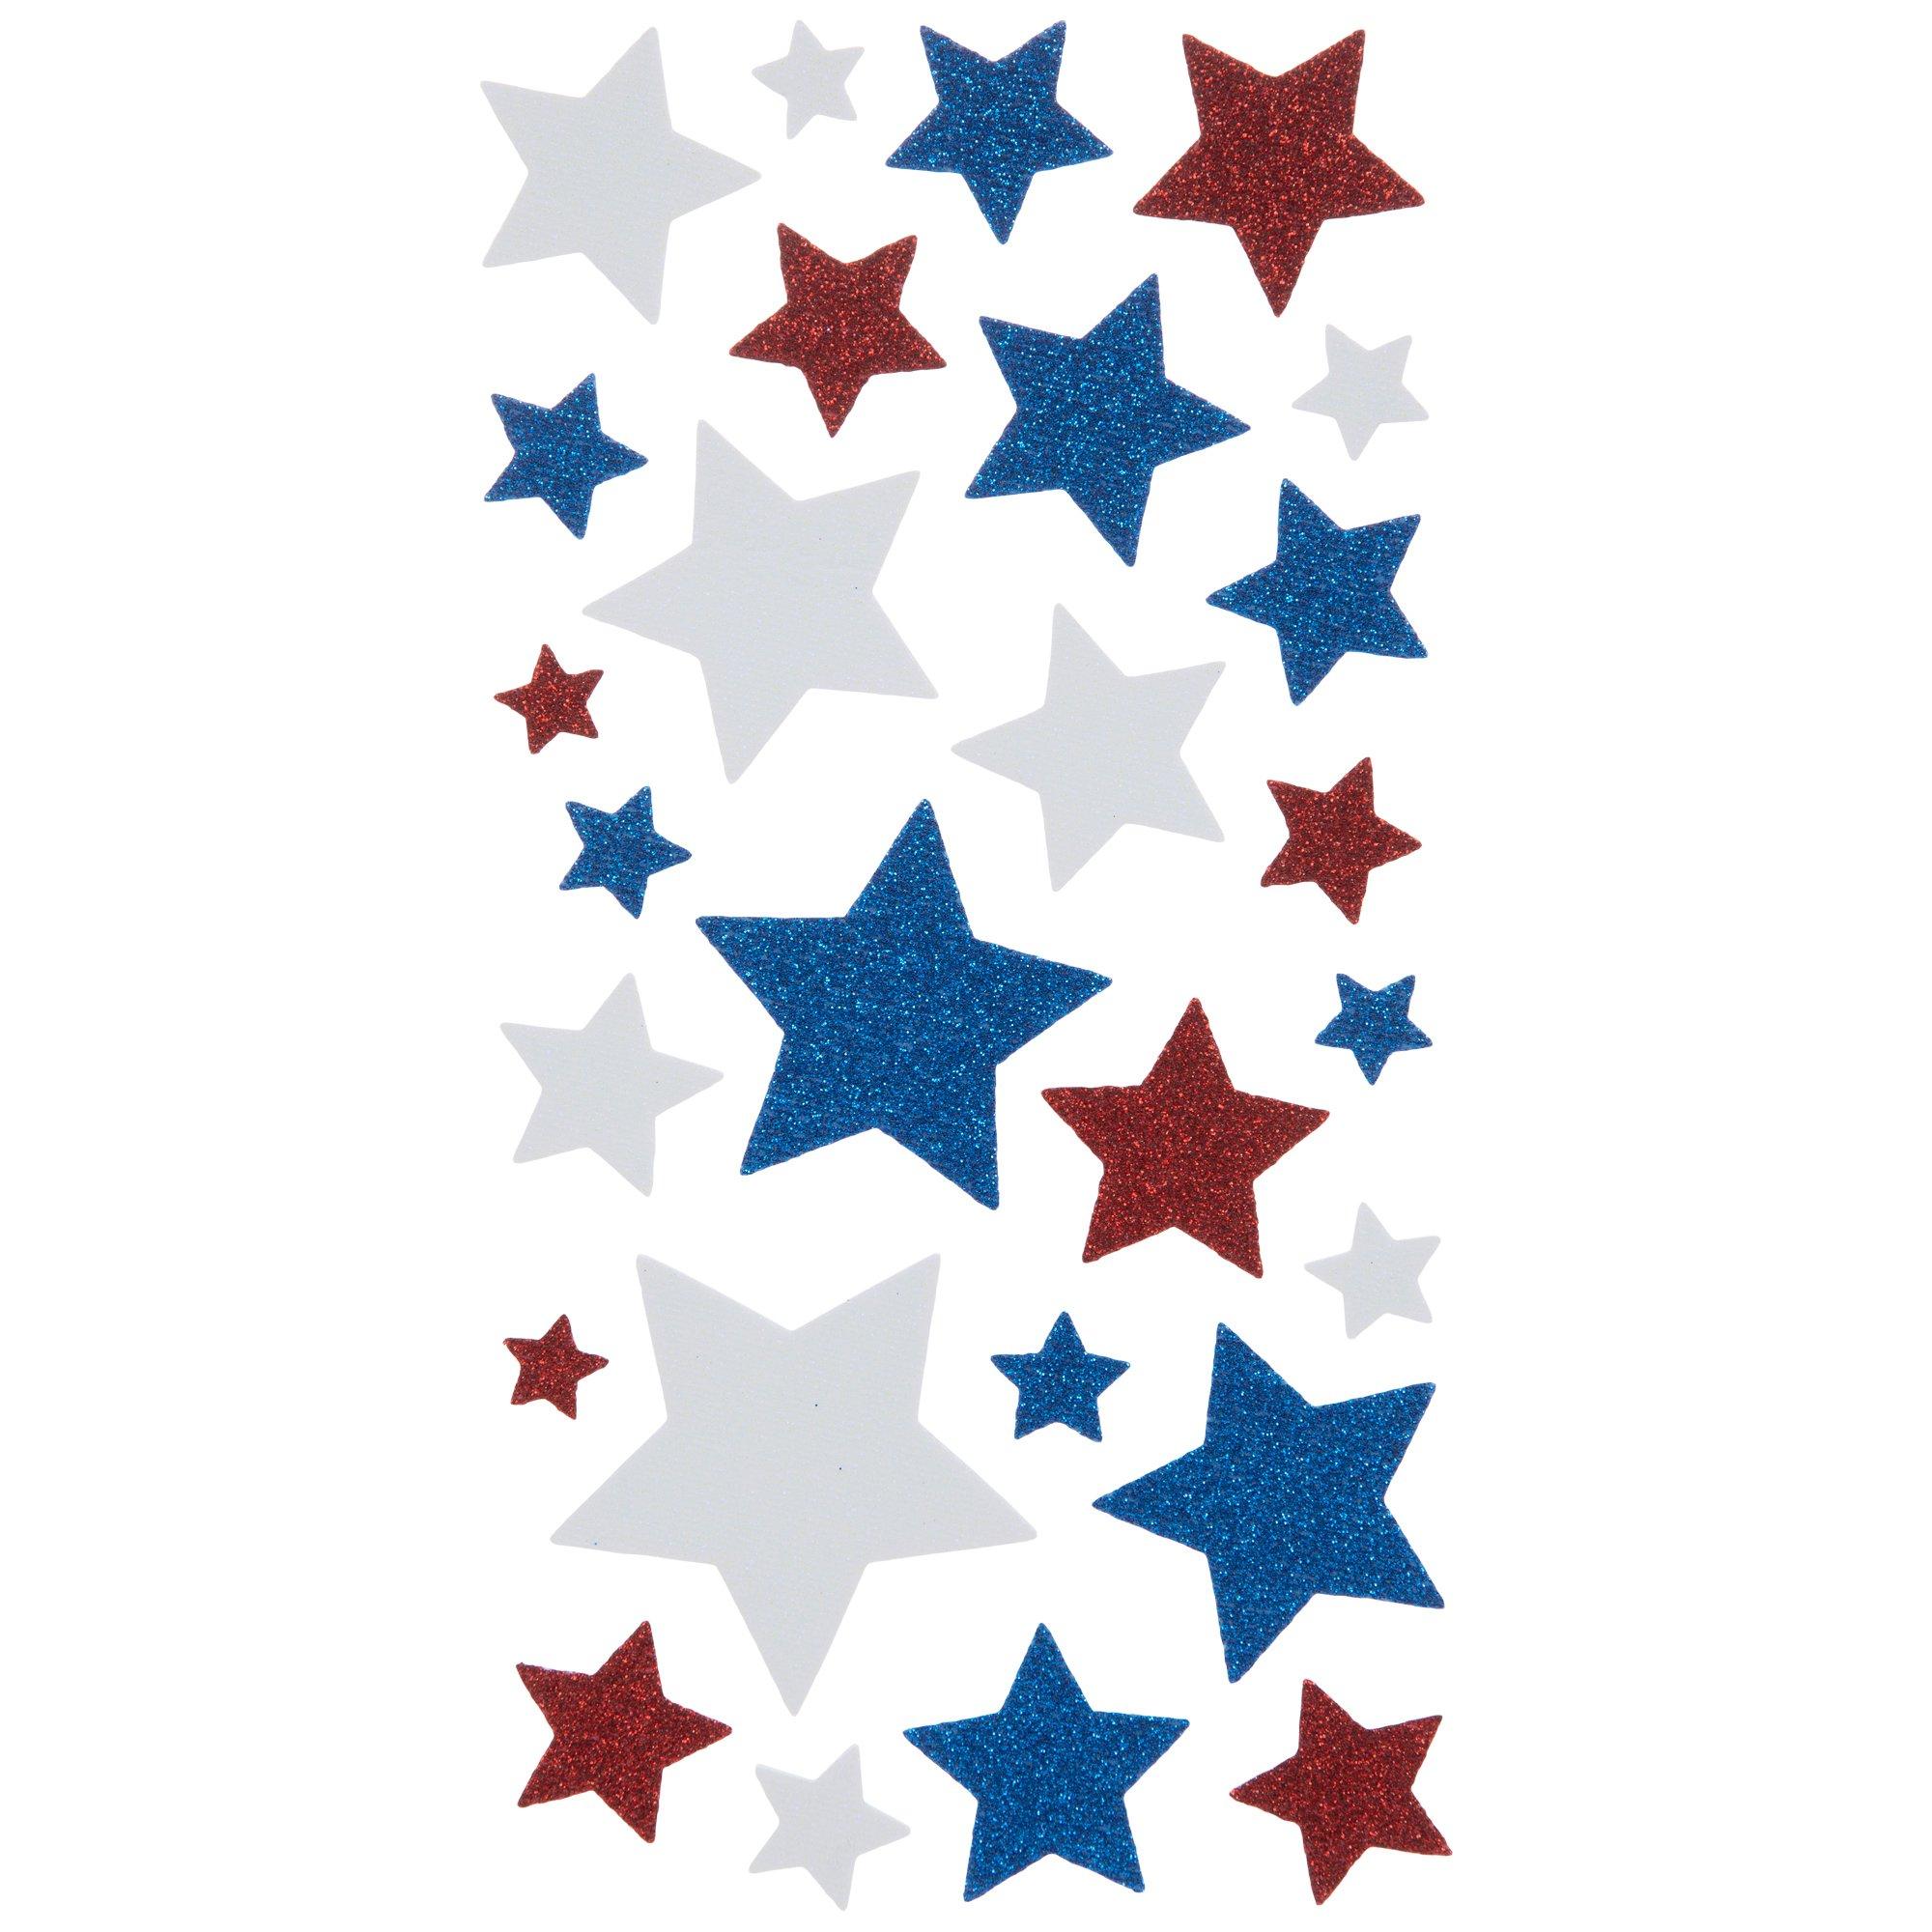 red and white star clipart